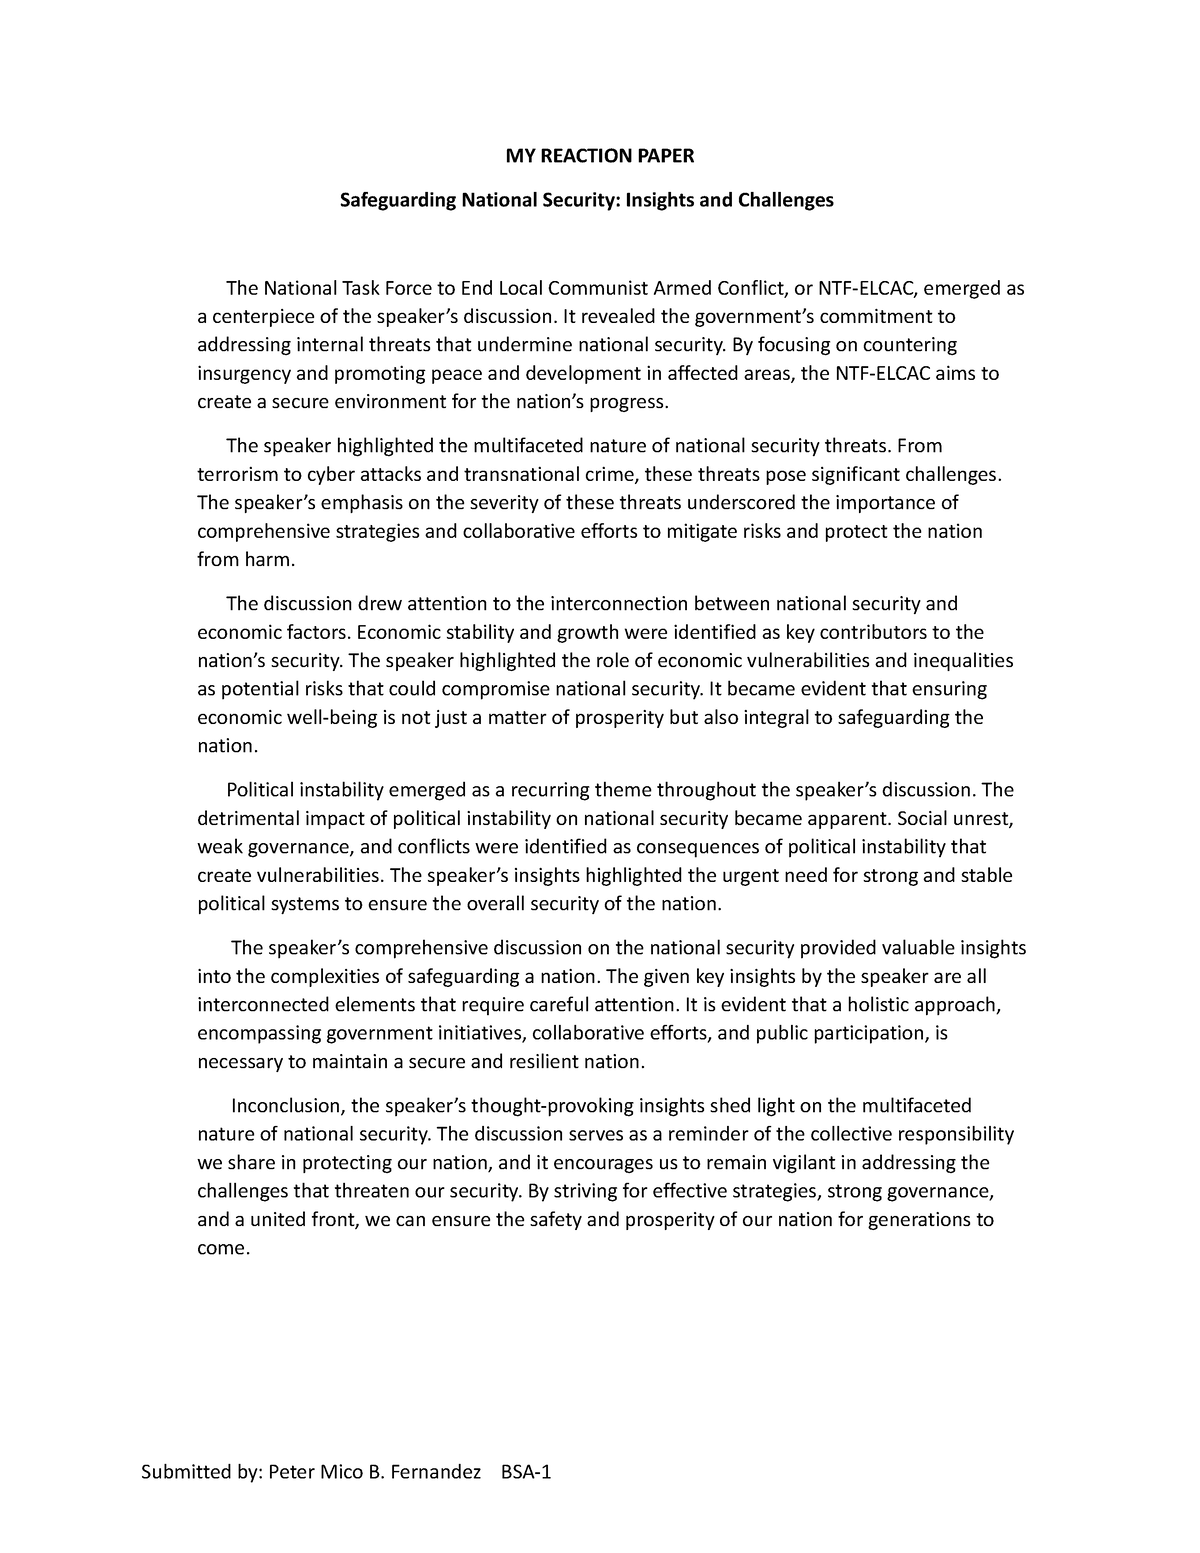 Reaction paper - MY REACTION PAPER Safeguarding National Security ...